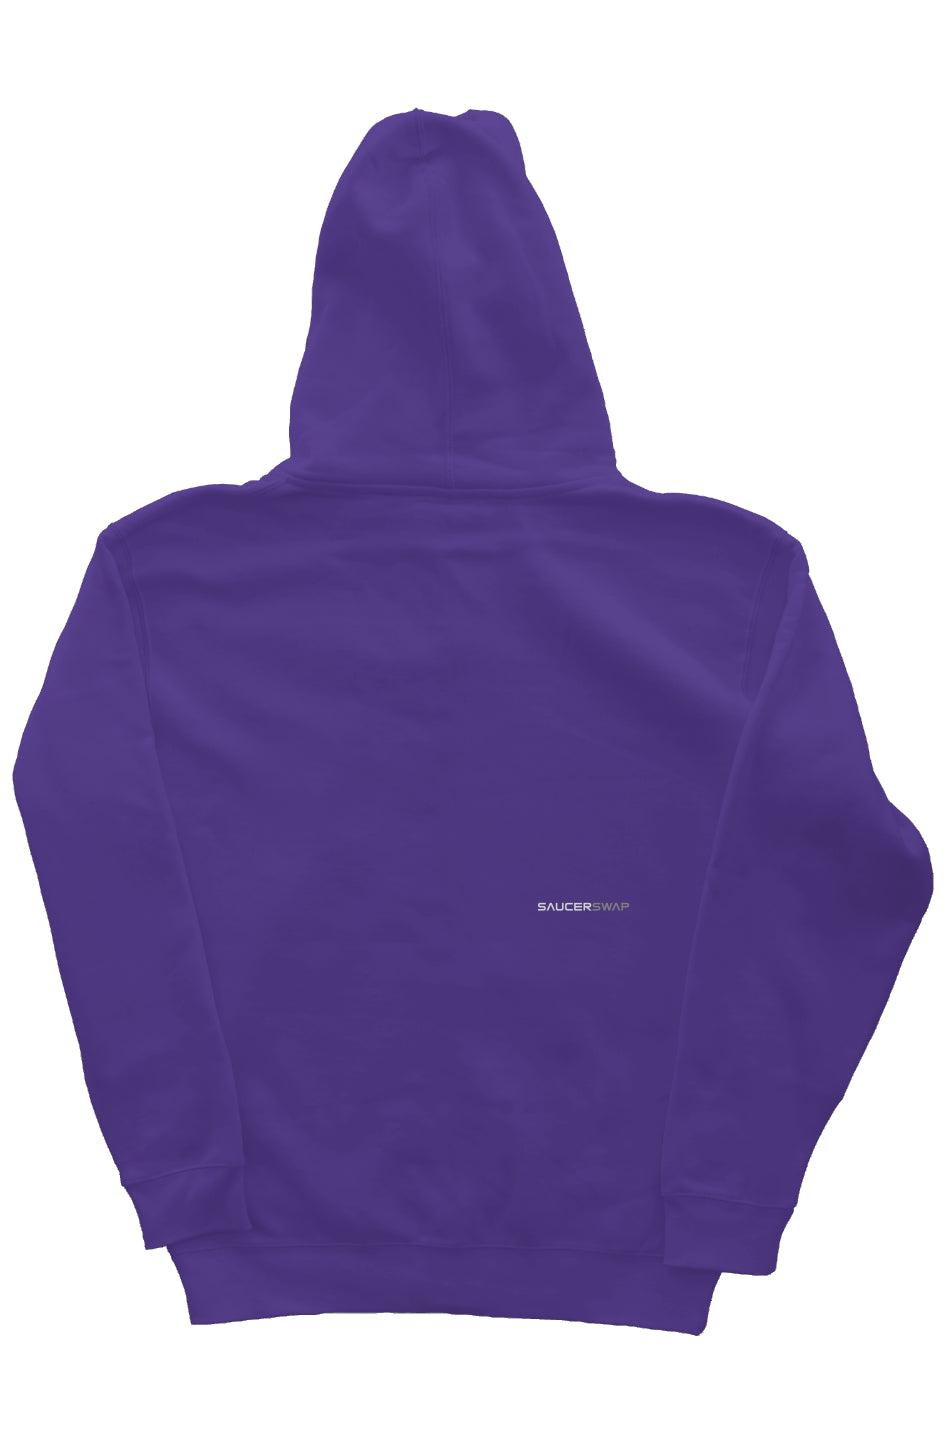 Larry Bunny SaucerSwap independent pullover hoody